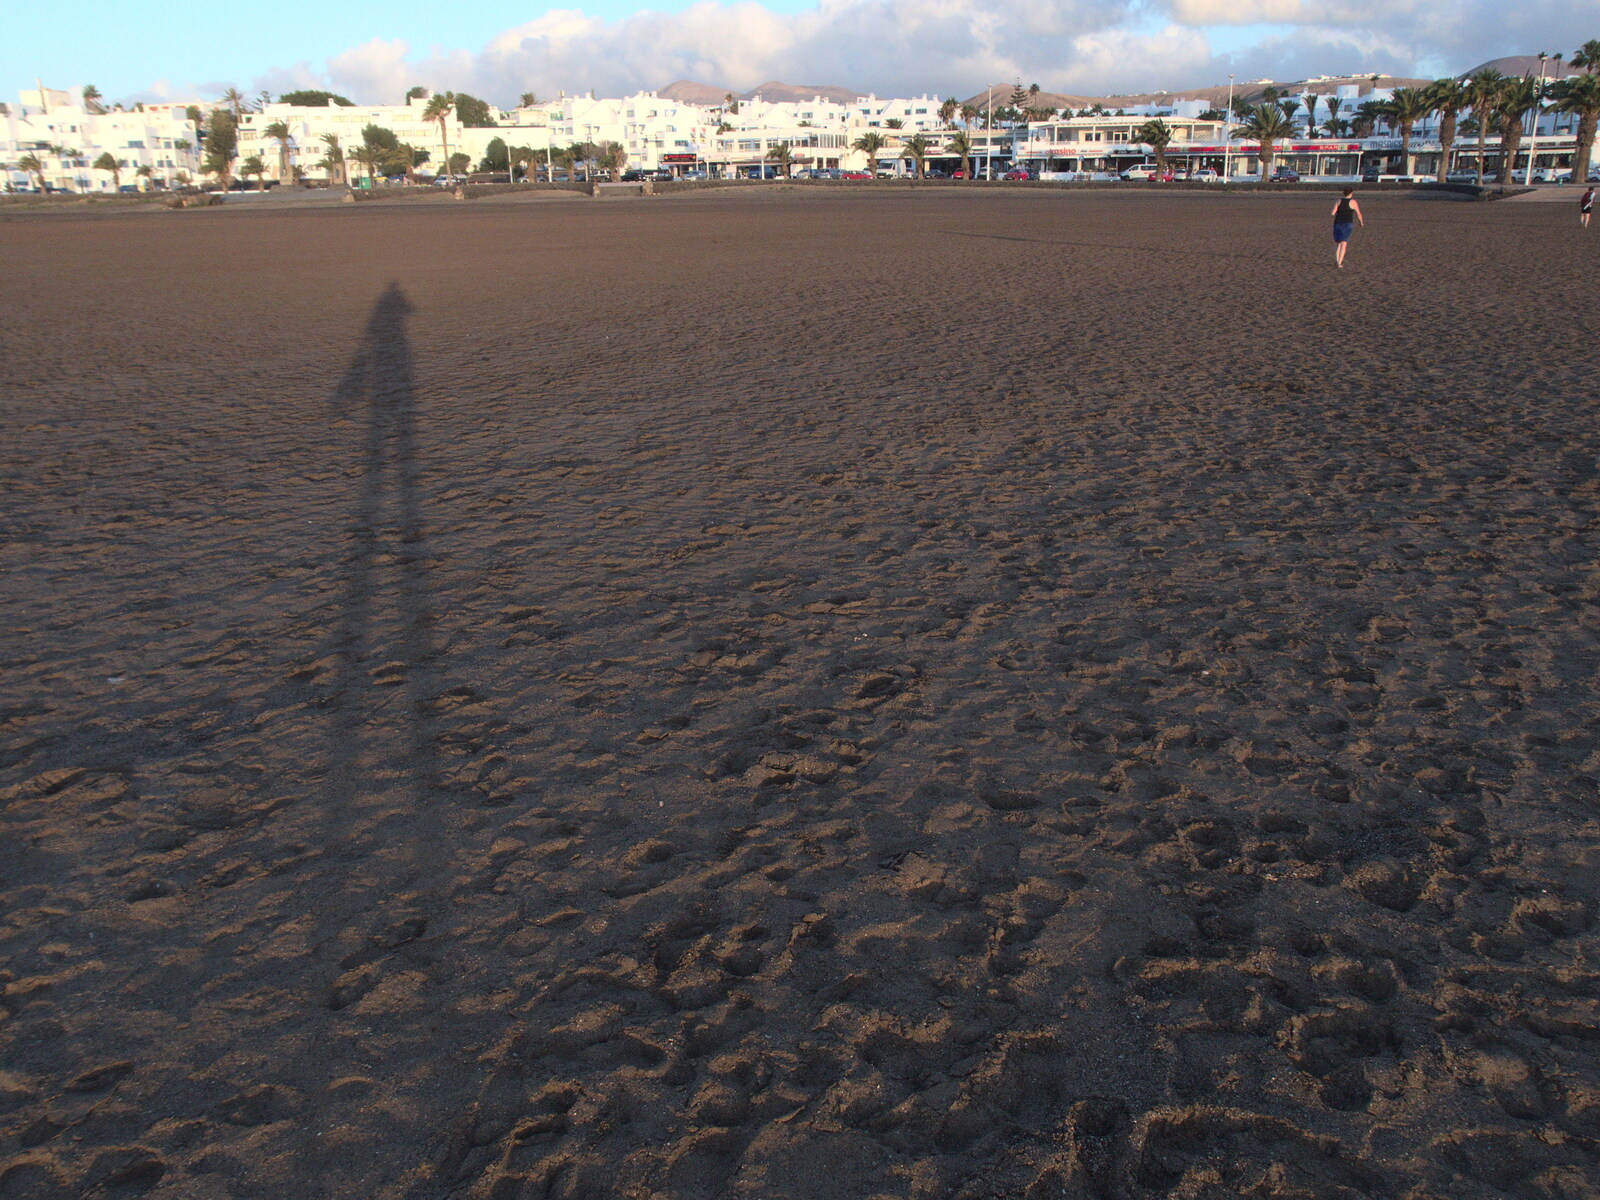 Nosher casts a long shadow from The Volcanoes of Lanzarote, Canary Islands, Spain - 27th October 2021